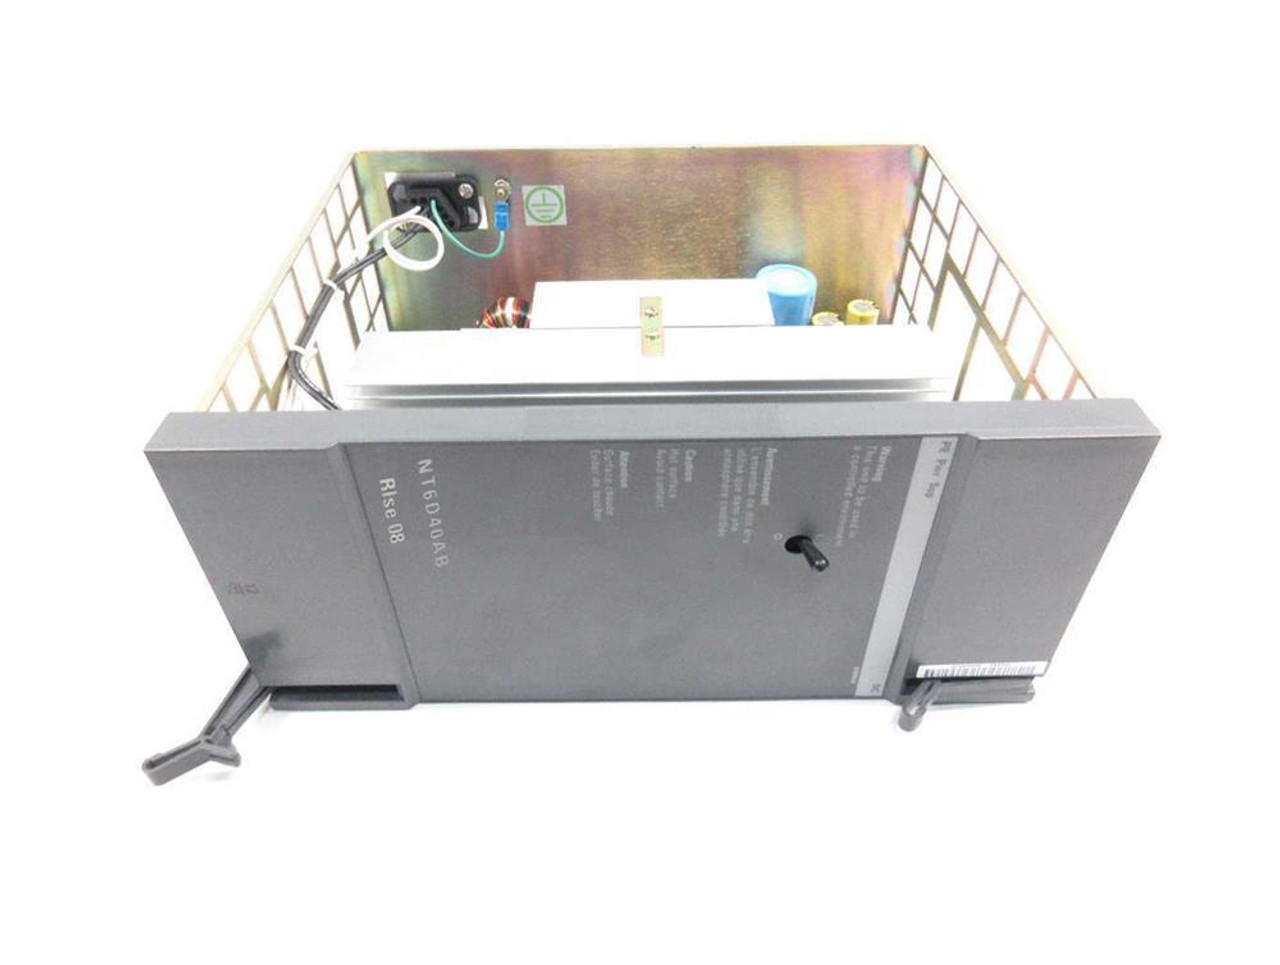 NT6D40AB 08SMX9 Nortel Peripheral Equipment DC Power Supply (Refurbished) NT6D40AB